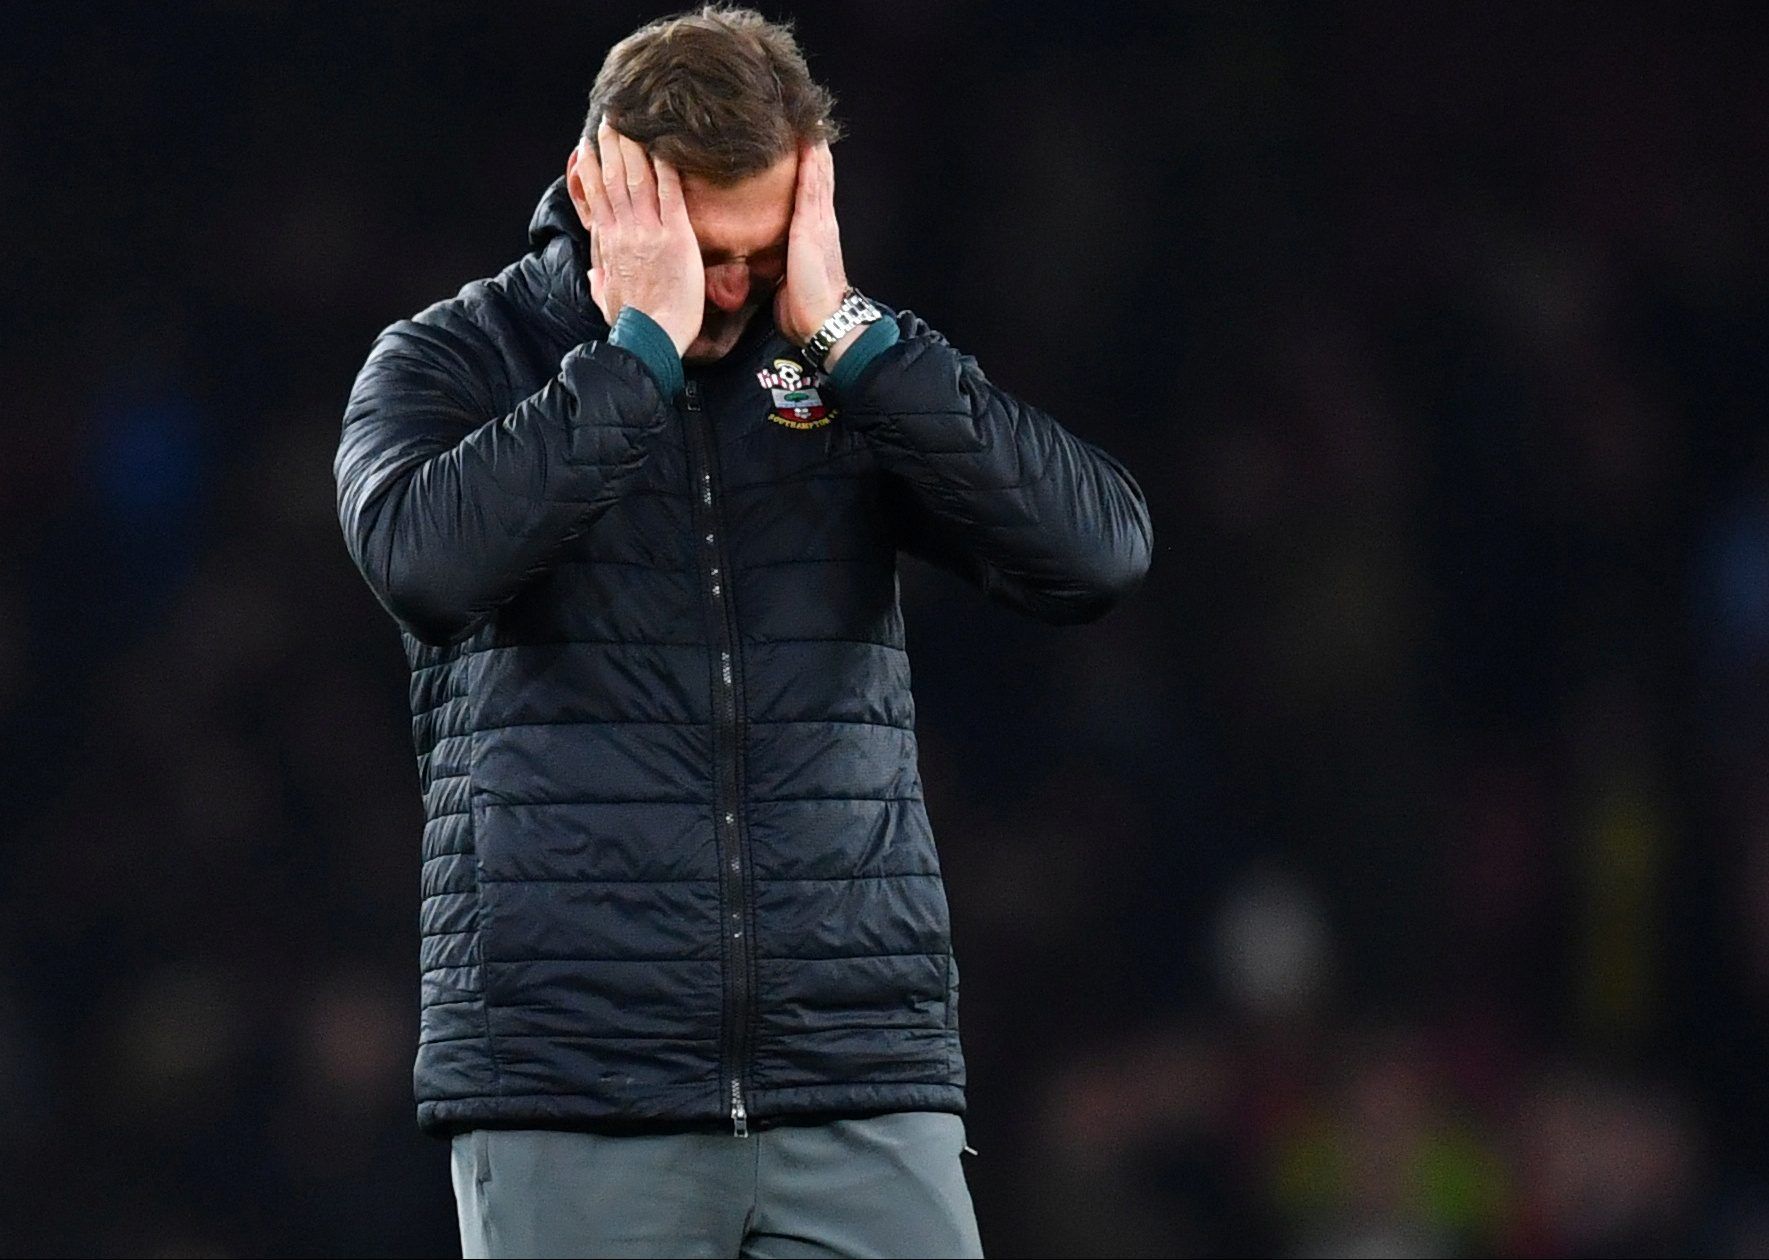 Soccer Football - Premier League - Arsenal v Southampton - Emirates Stadium, London, Britain - November 23, 2019  Southampton manager Ralph Hasenhuttl reacts after the match                       REUTERS/Dylan Martinez  EDITORIAL USE ONLY. No use with unauthorized audio, video, data, fixture lists, club/league logos or 